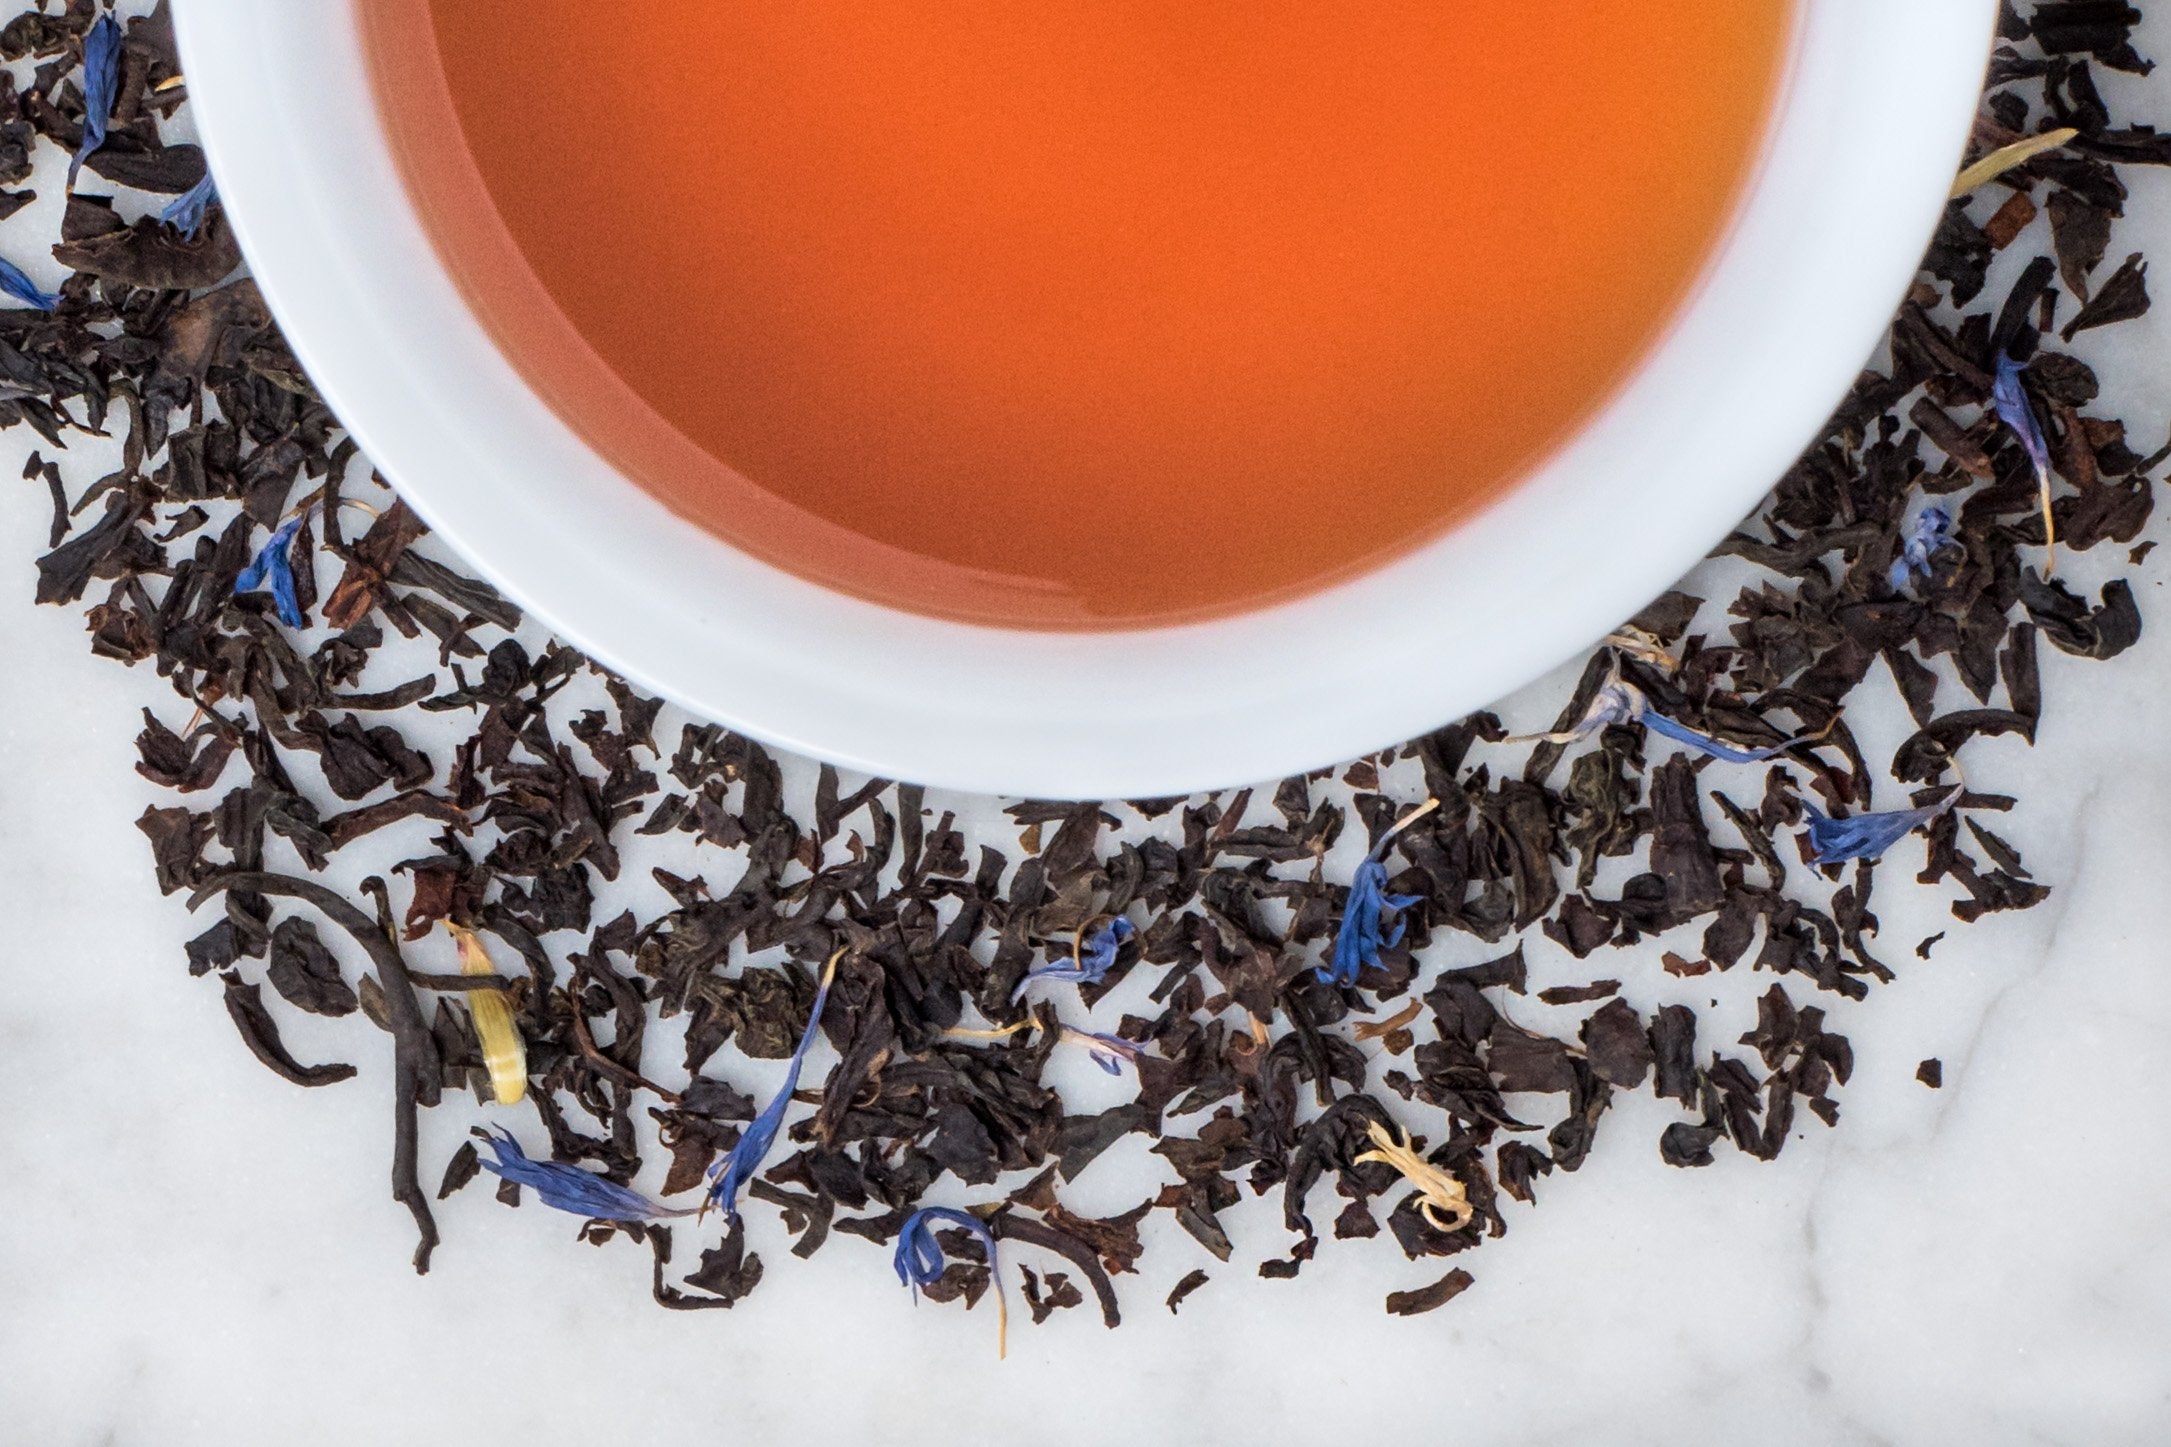 Bergamot and Vanilla Scented Tea Leaves Surround A Cozy Cup of Organic Spa City Earl